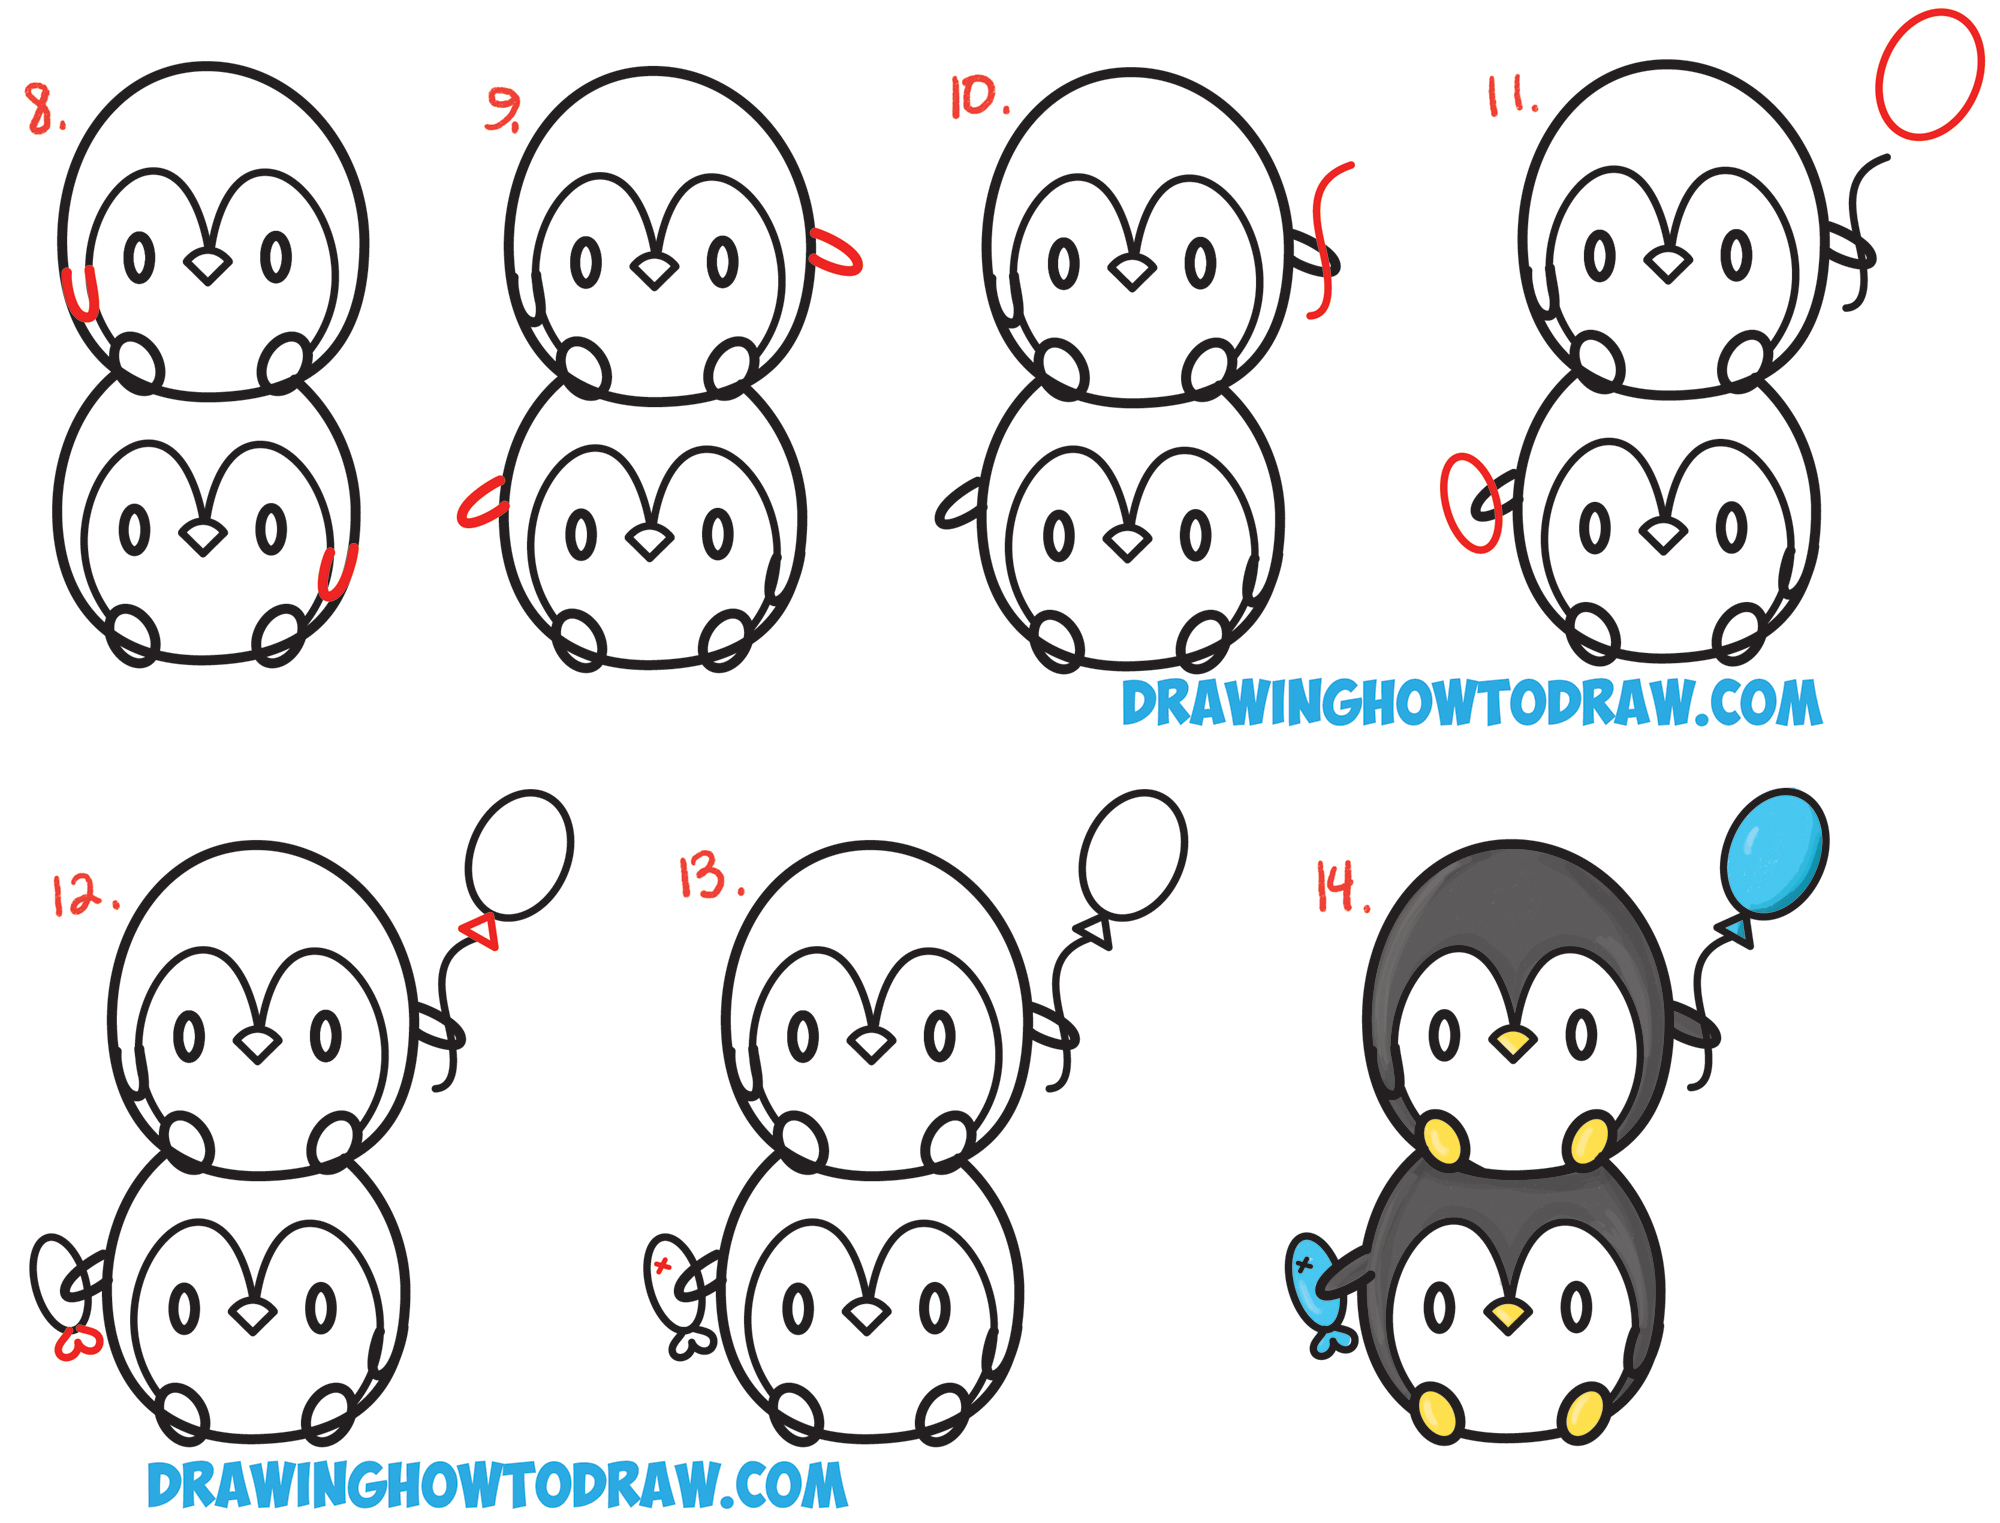 How to Draw Cute Kawaii Penguins Stacked from 8 with Easy Step by Step